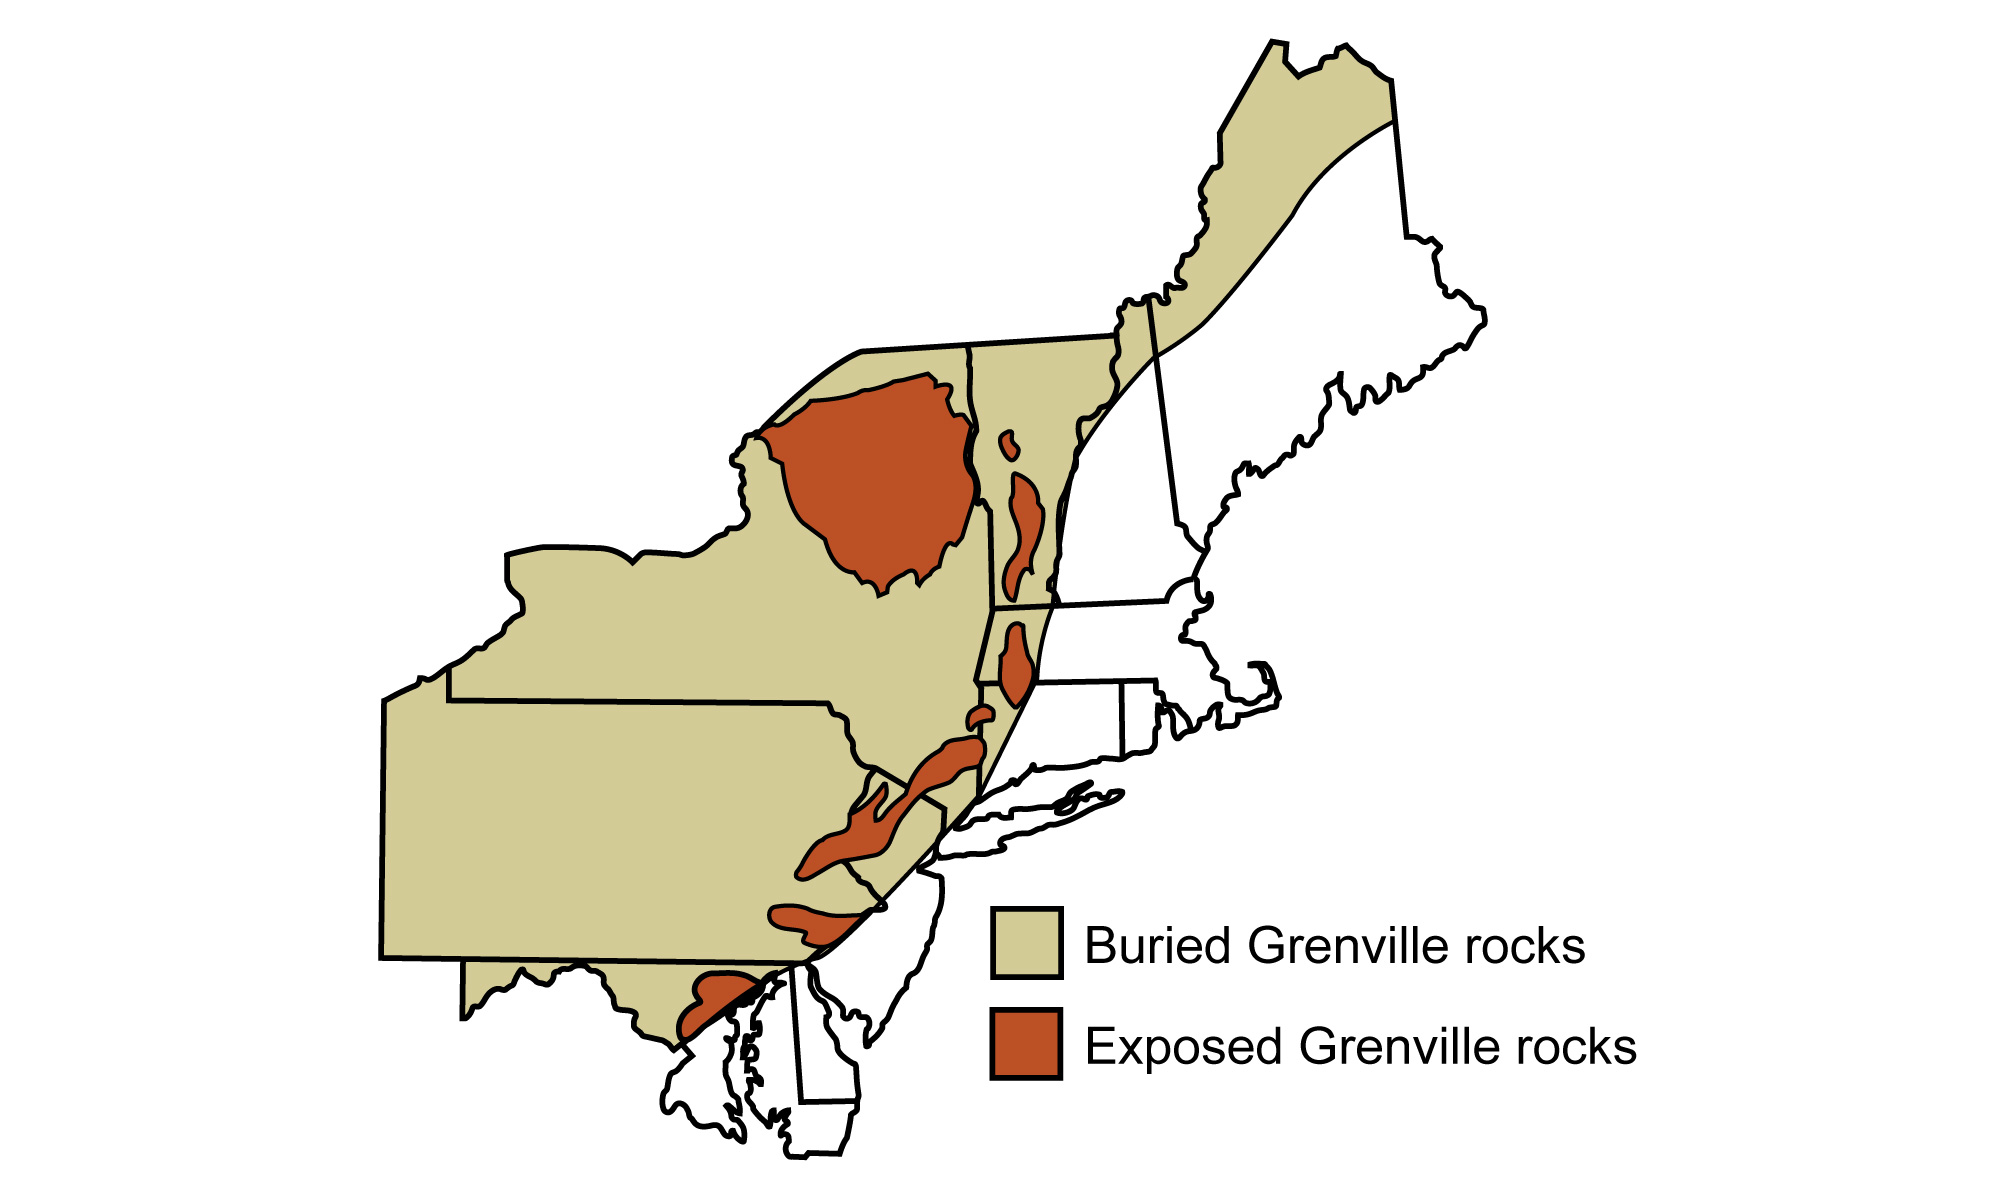 Map of the northeastern U.S. showing the locations of buried and exposed Grenville-aged rocks.